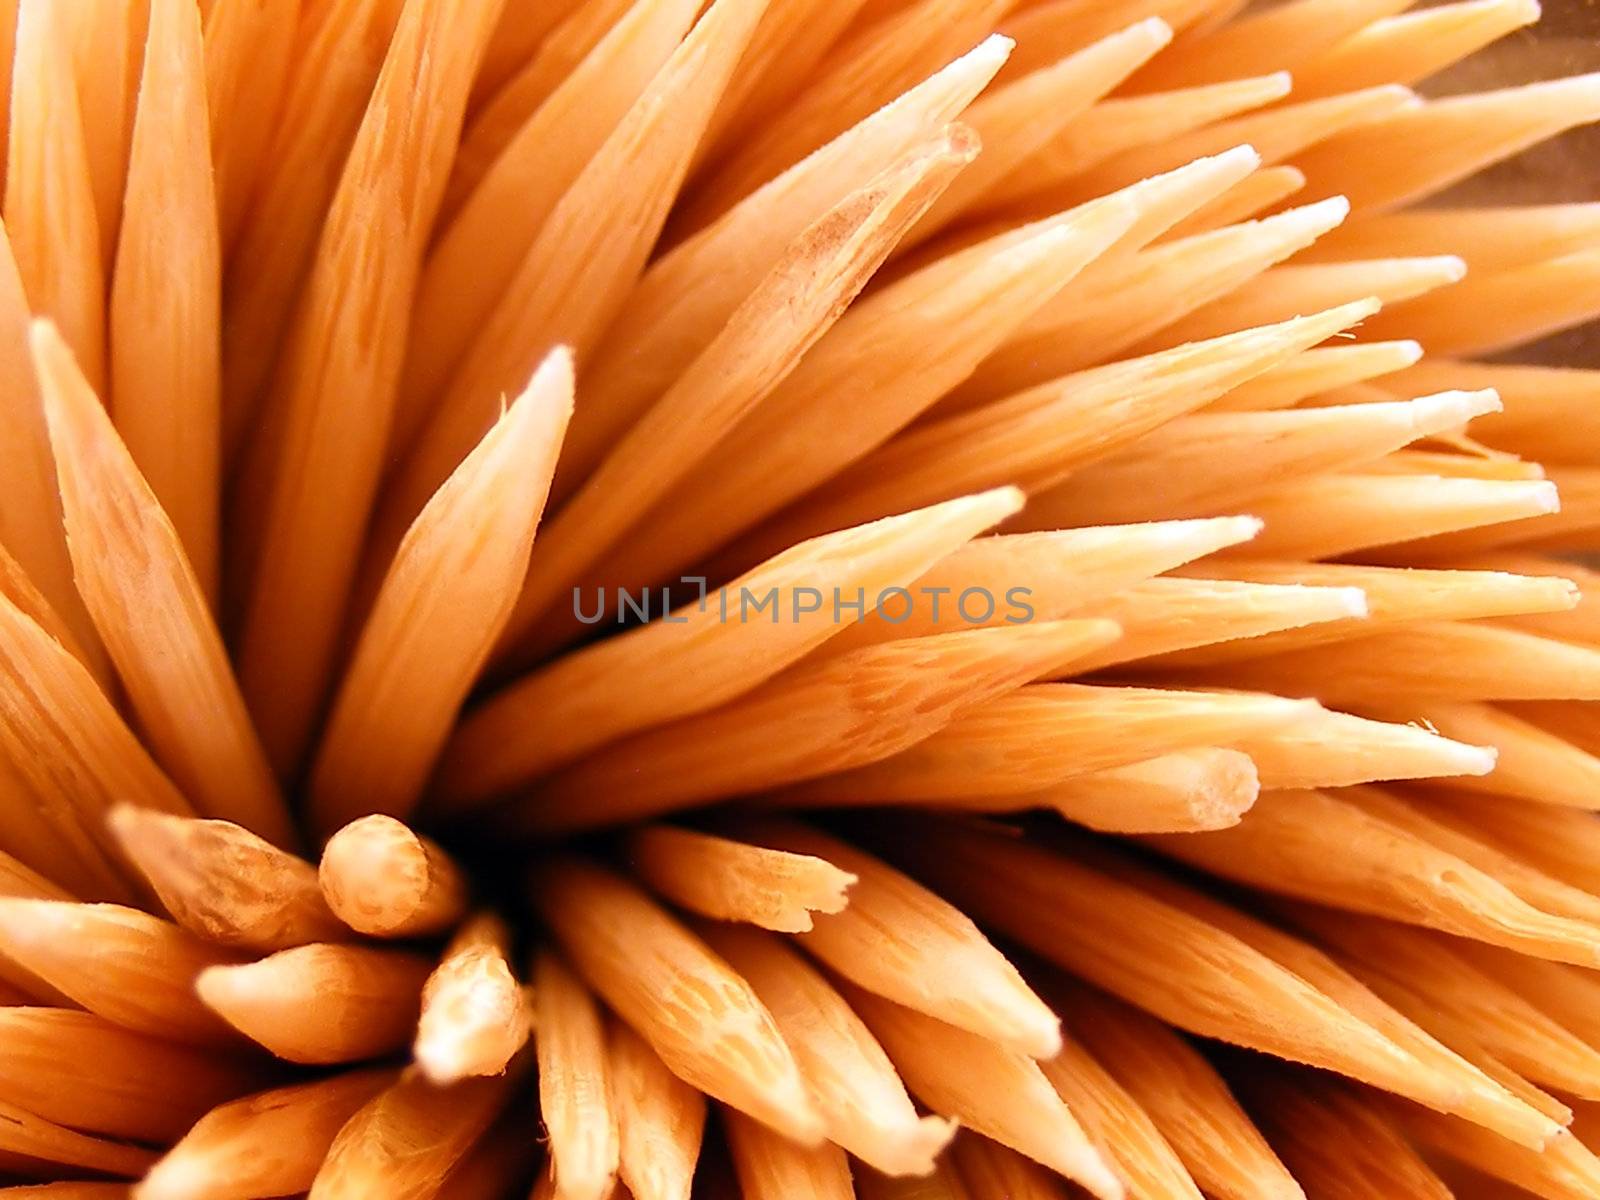 Macro of a bunch of toothpicks resembling a blooming plant.